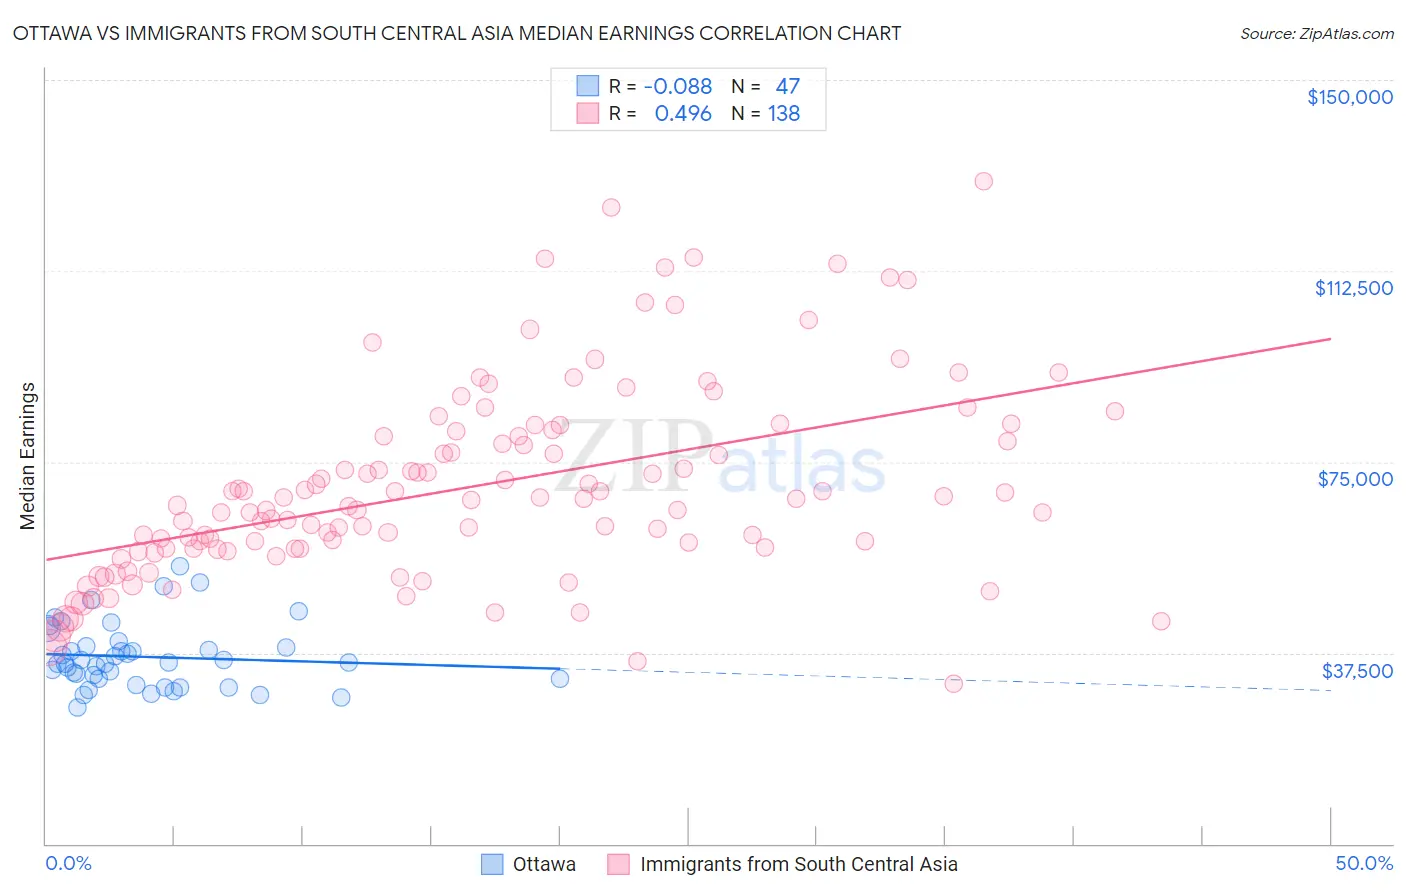 Ottawa vs Immigrants from South Central Asia Median Earnings